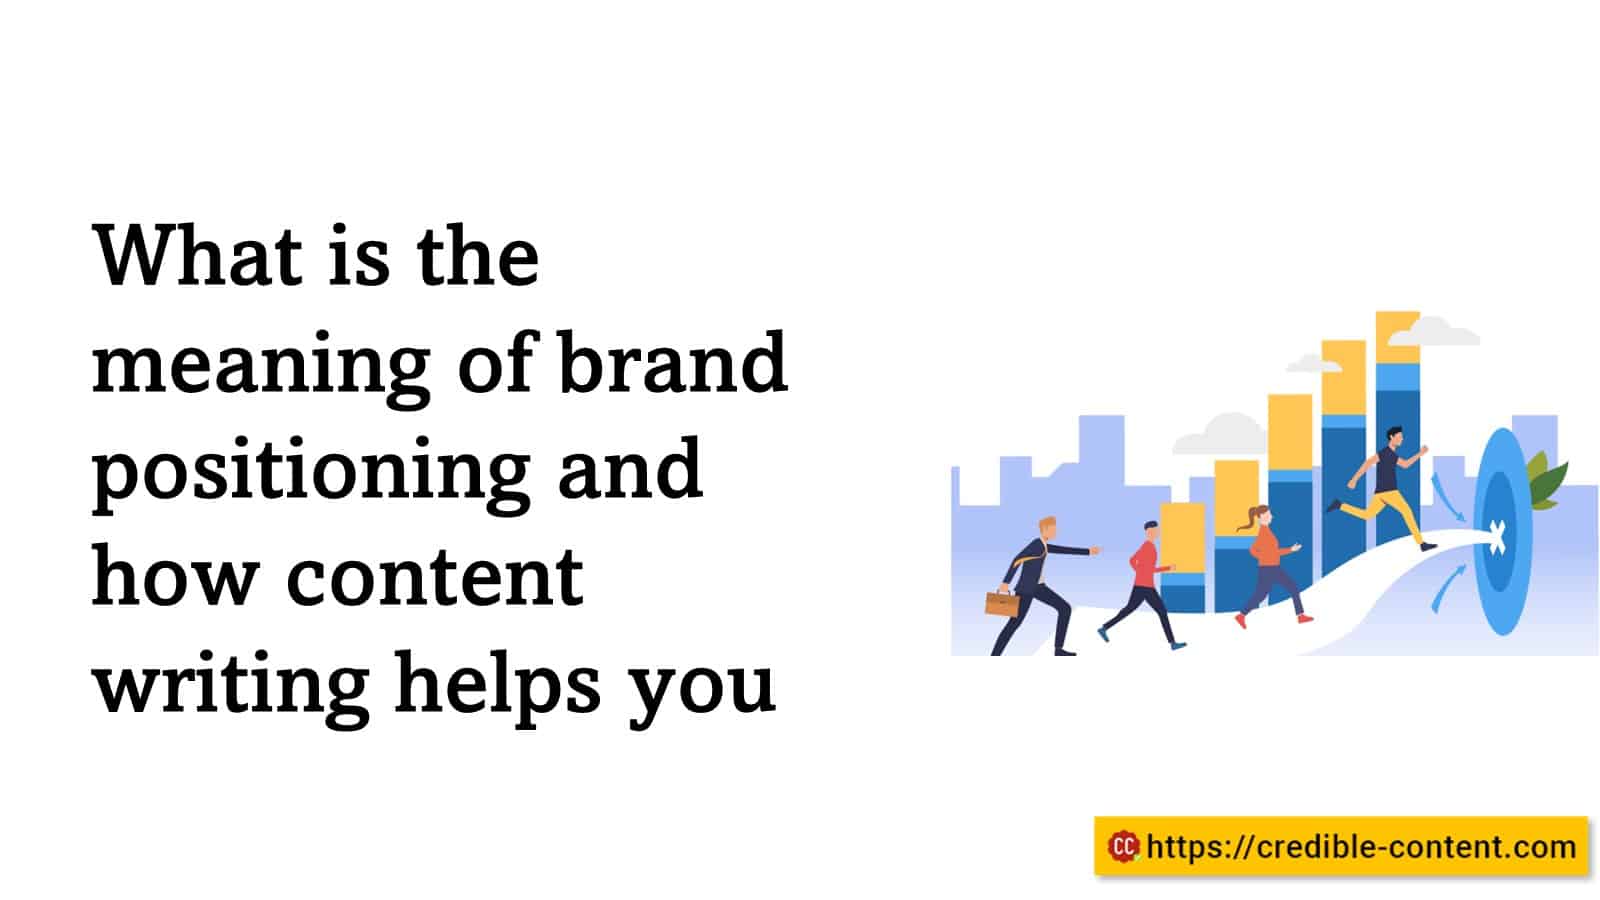 What is the meaning of brand positioning and how content writing helps you